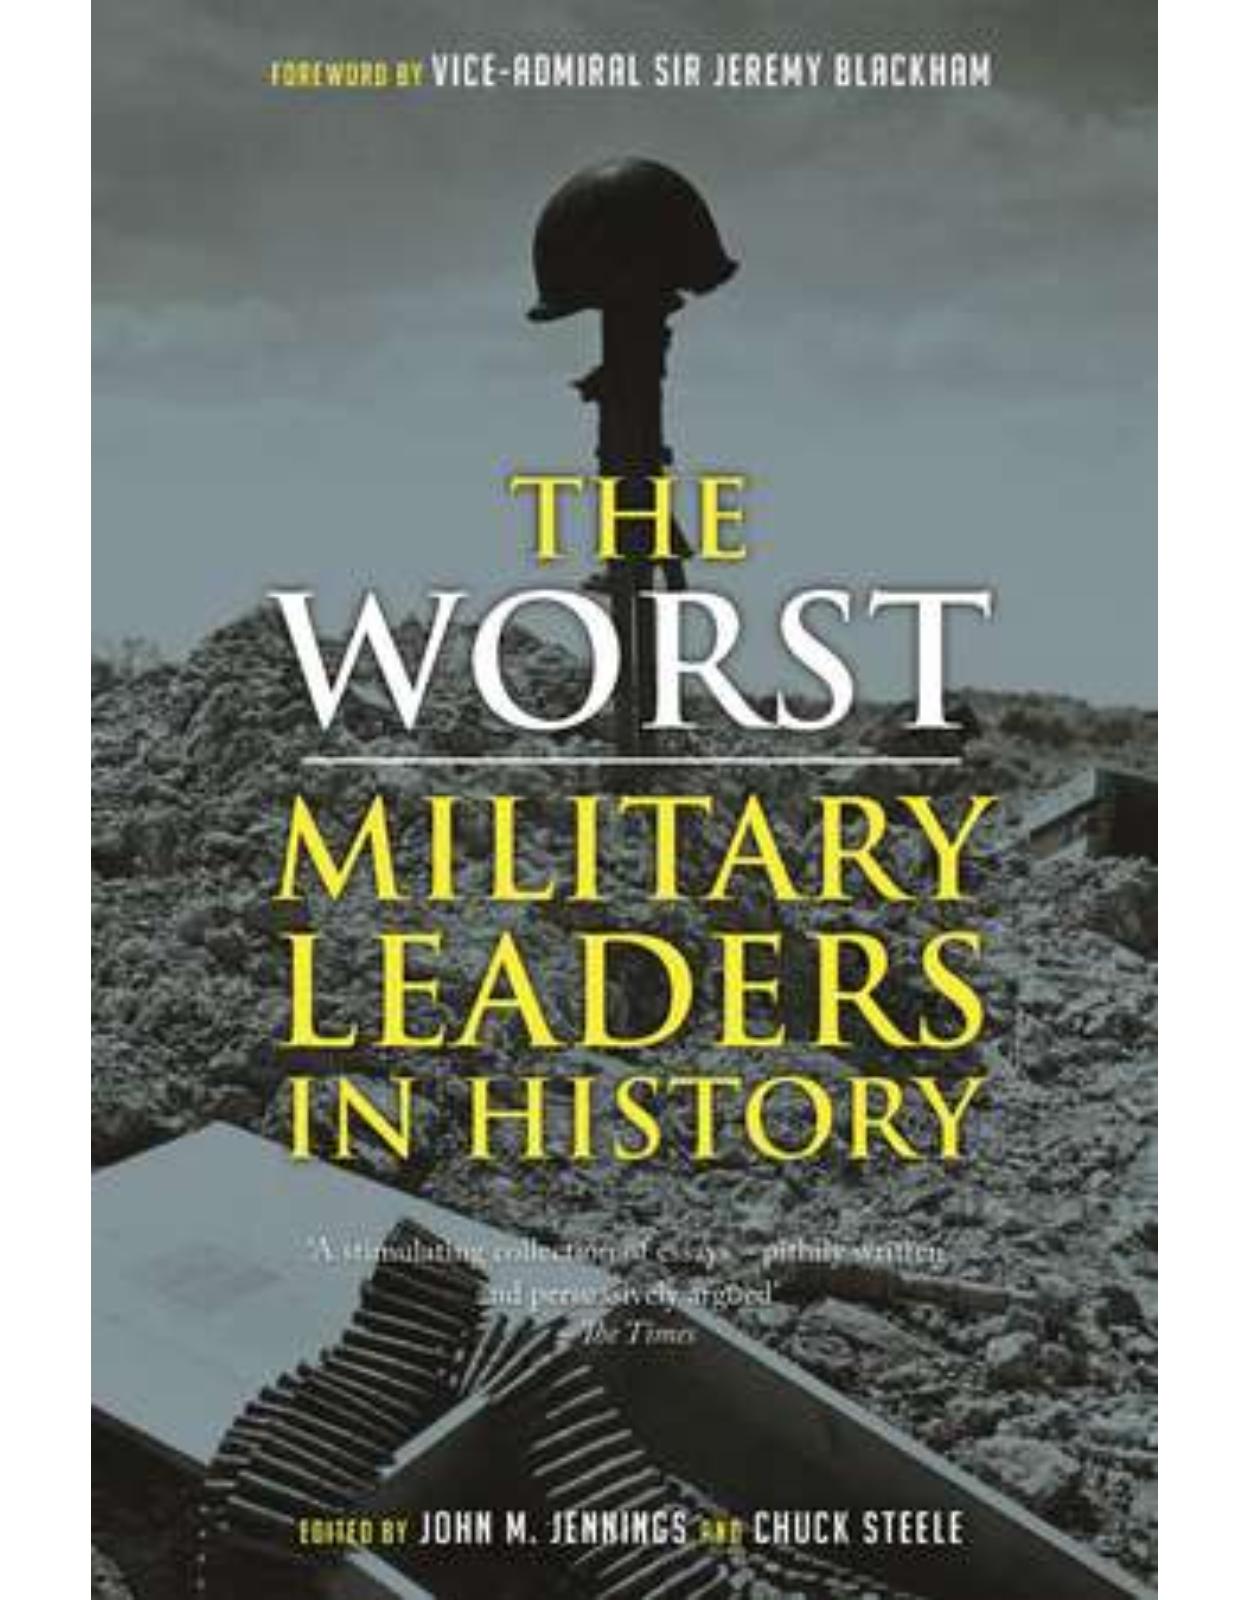 The Worst Military Leaders in History